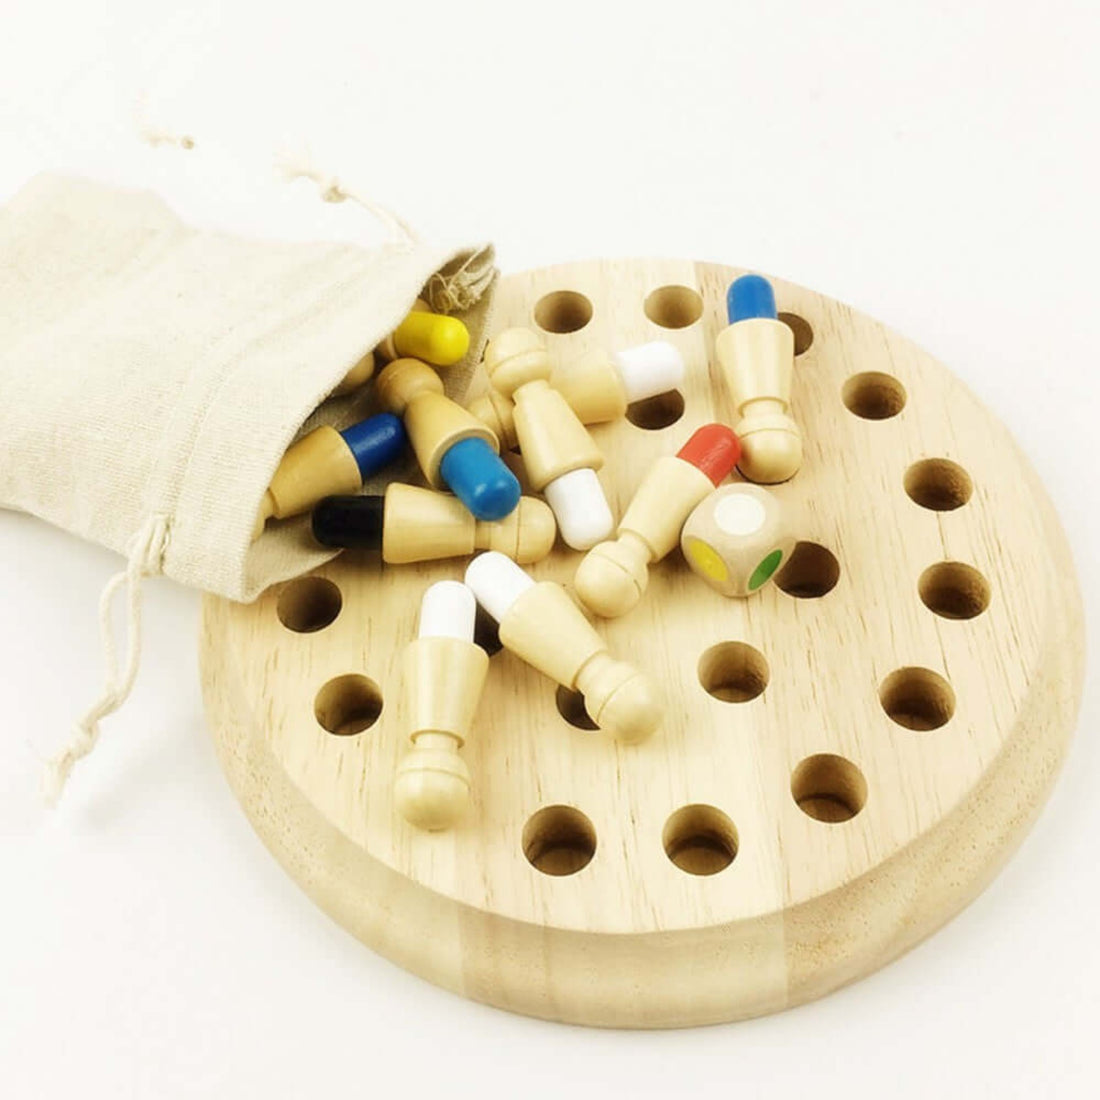 High-quality wooden learning toys